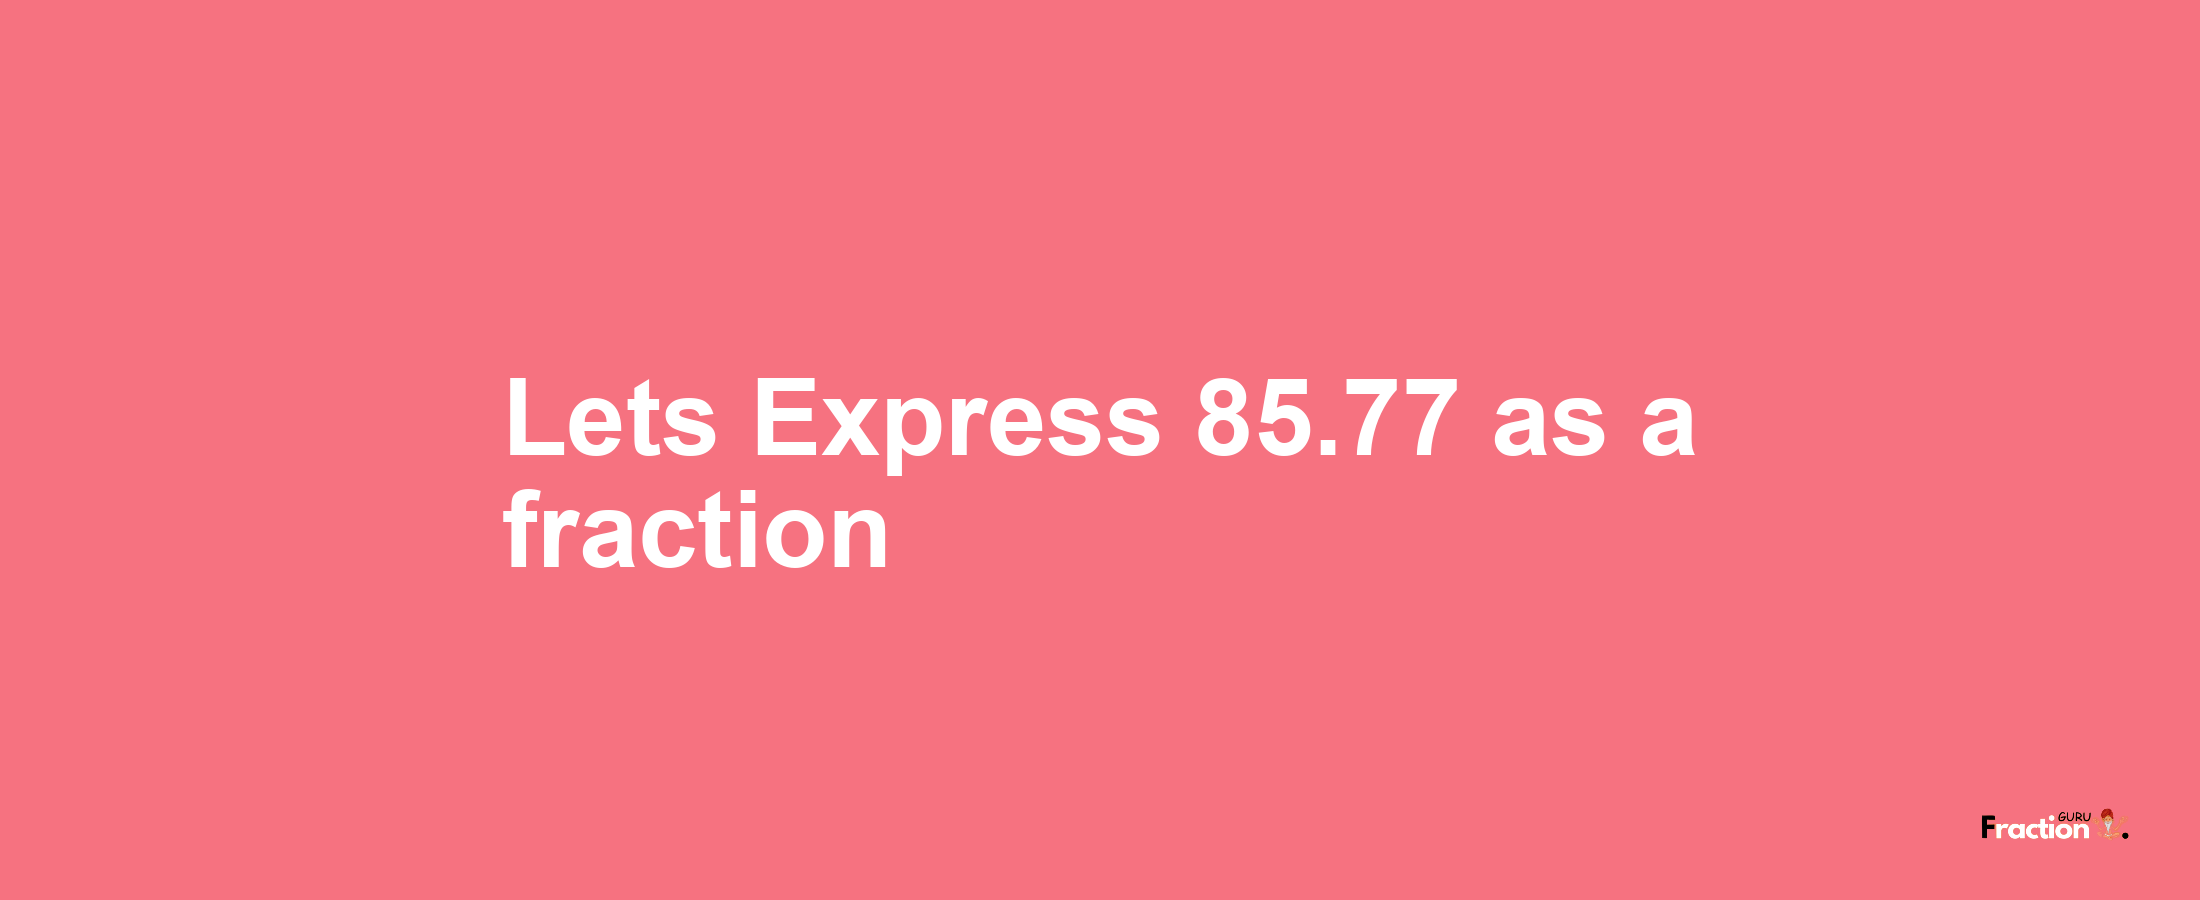 Lets Express 85.77 as afraction